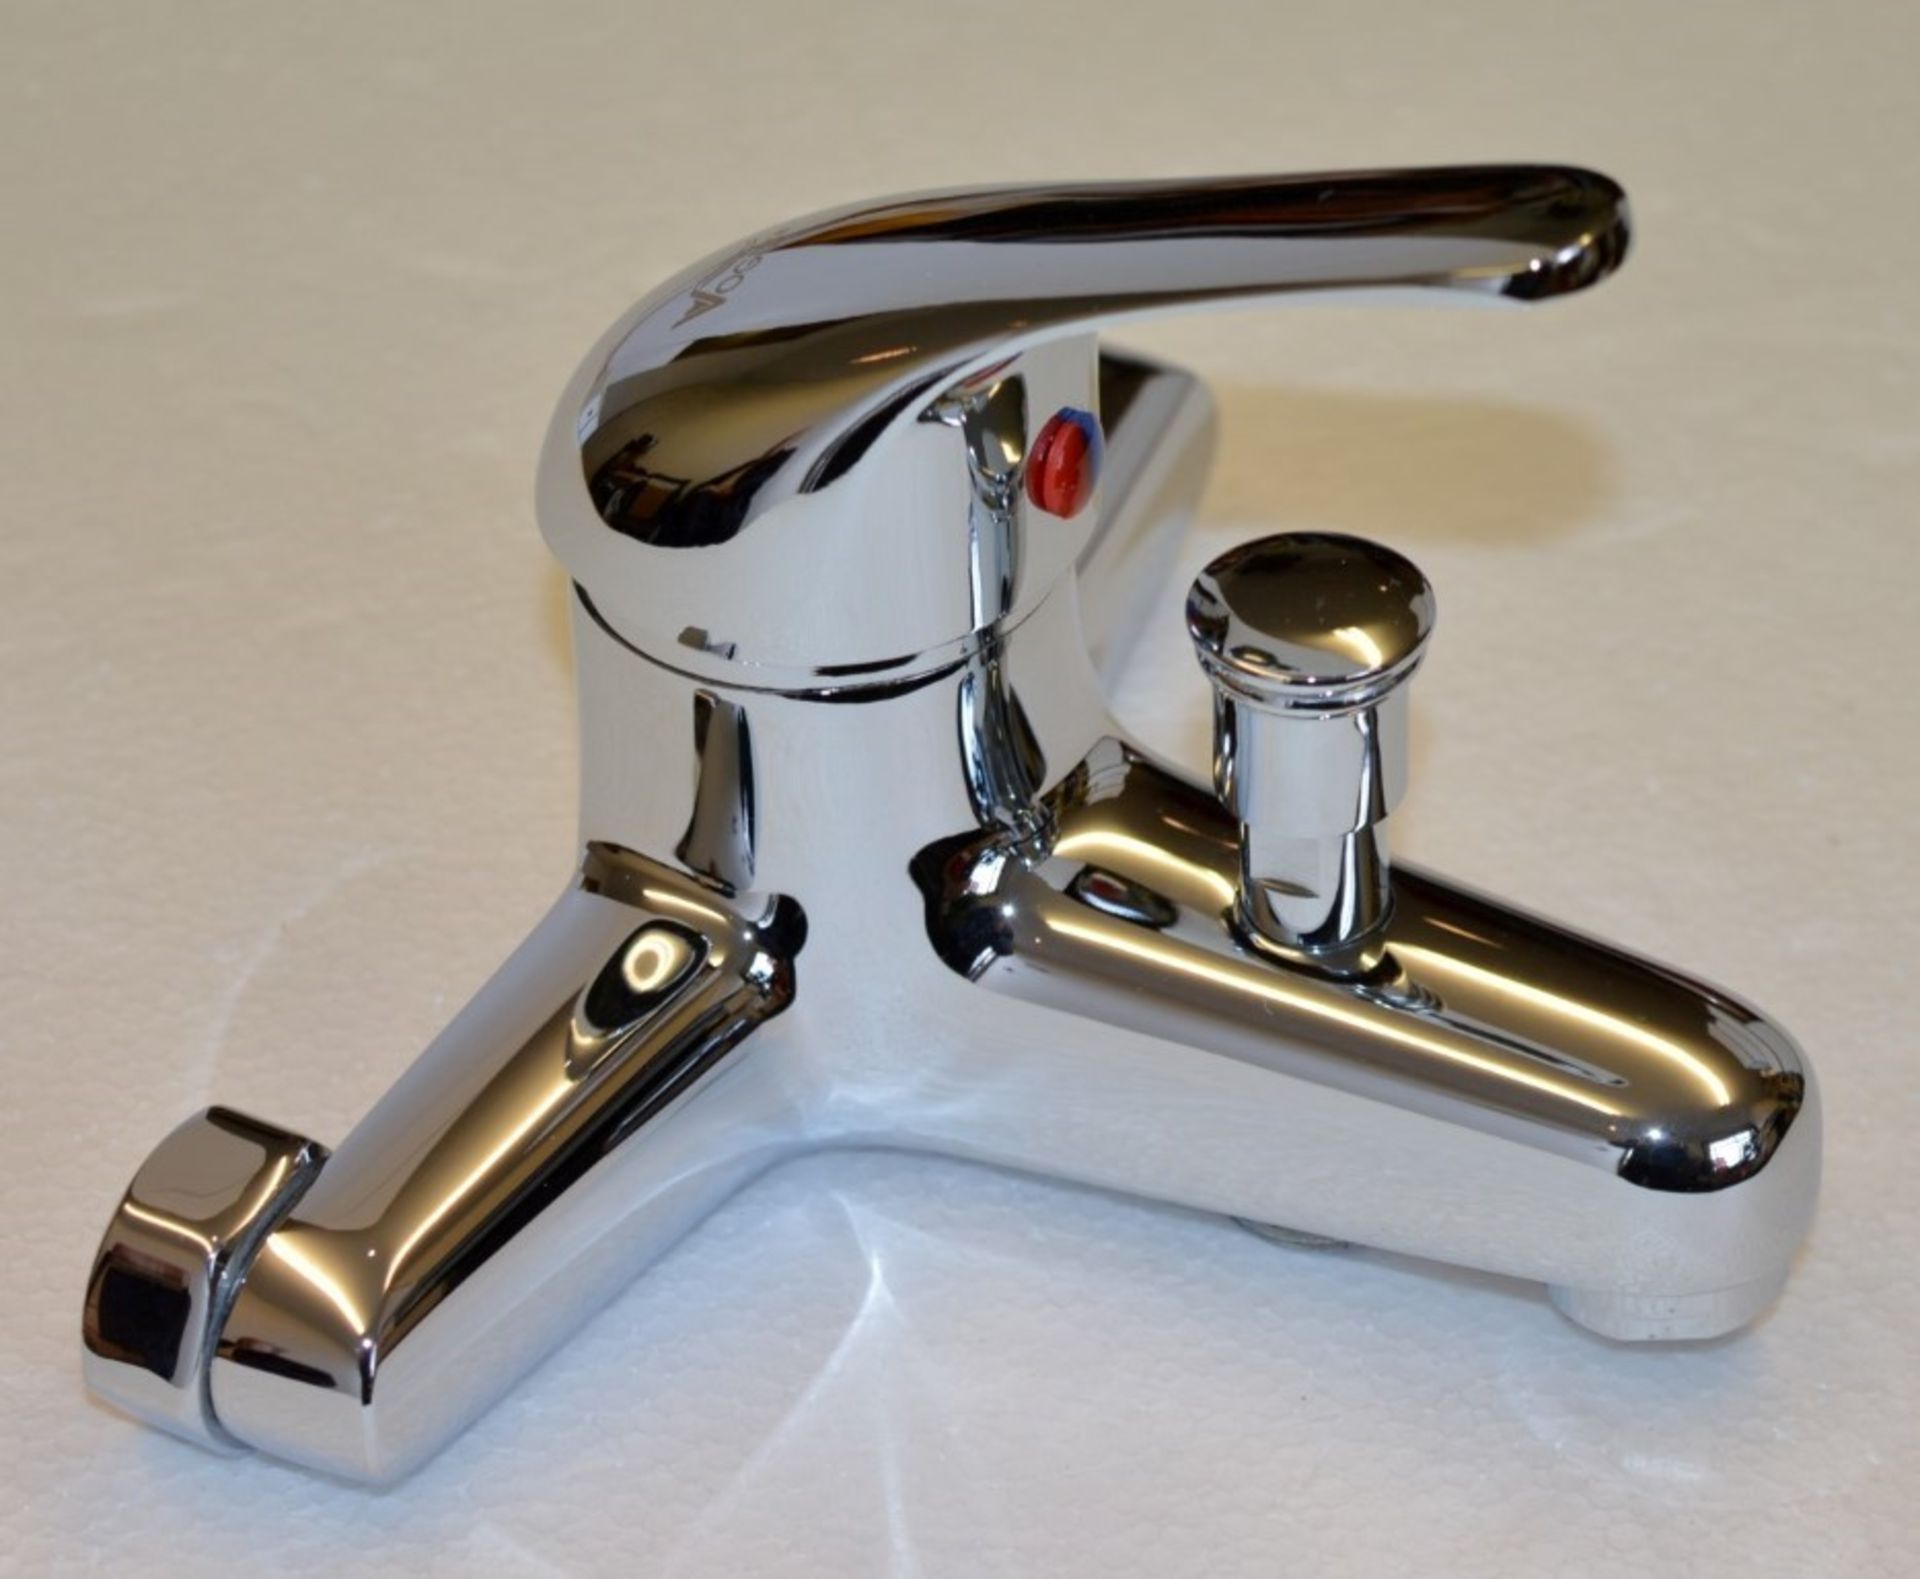 1 x Vogue Carmina Deck Mounted Bath Shower Mixer Tap - Includes Bath Mixer Tap, Shower Head and - Image 4 of 11